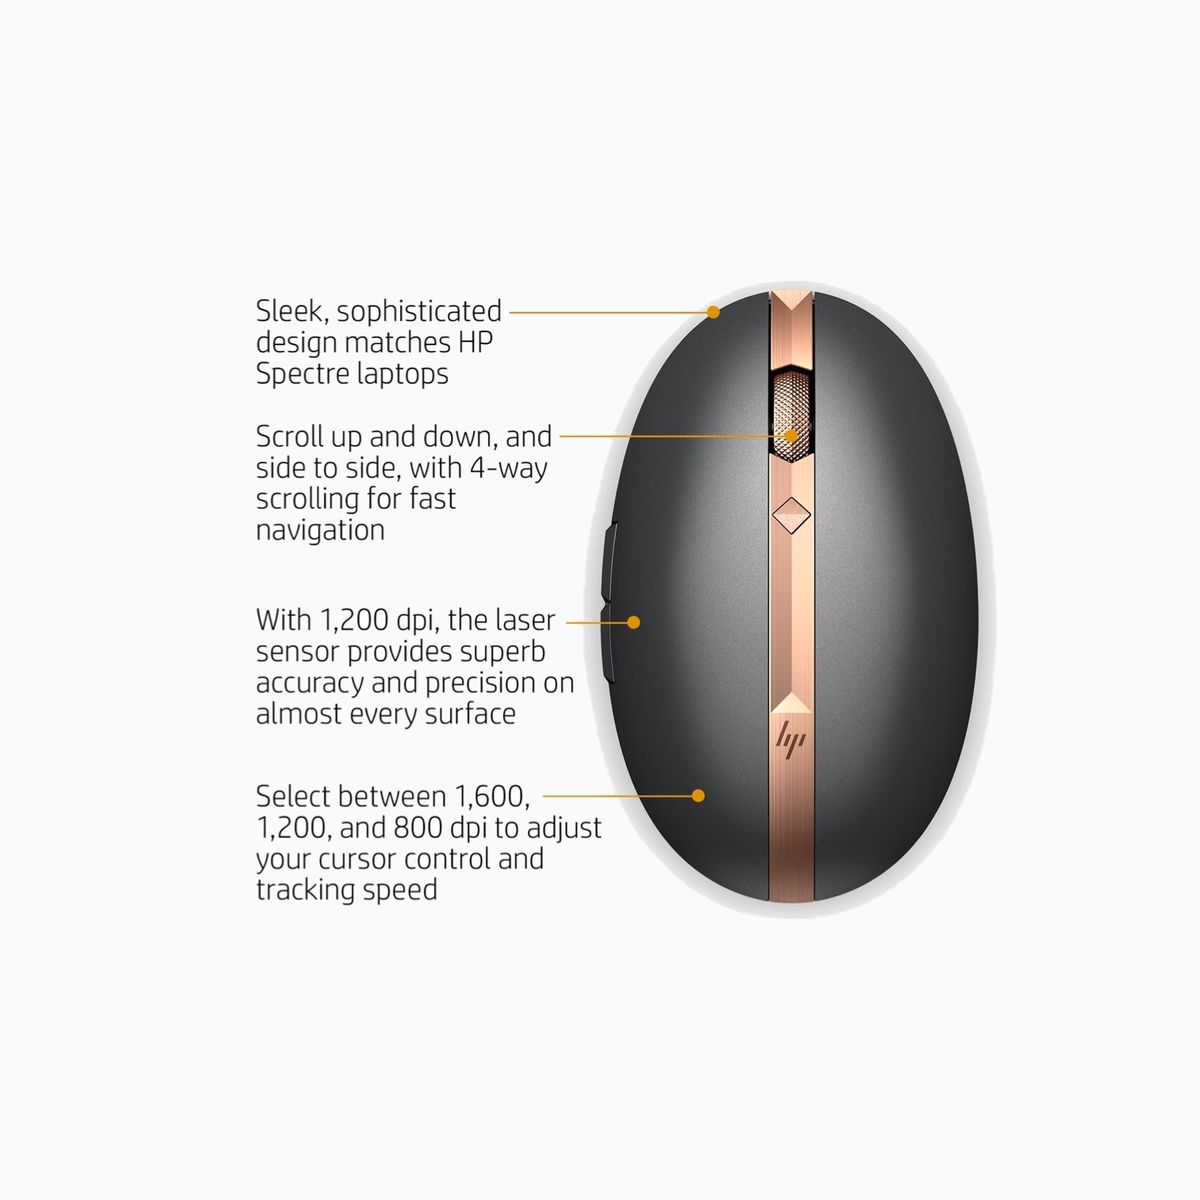 hp-spectre-mouse-700--new-5.jpg